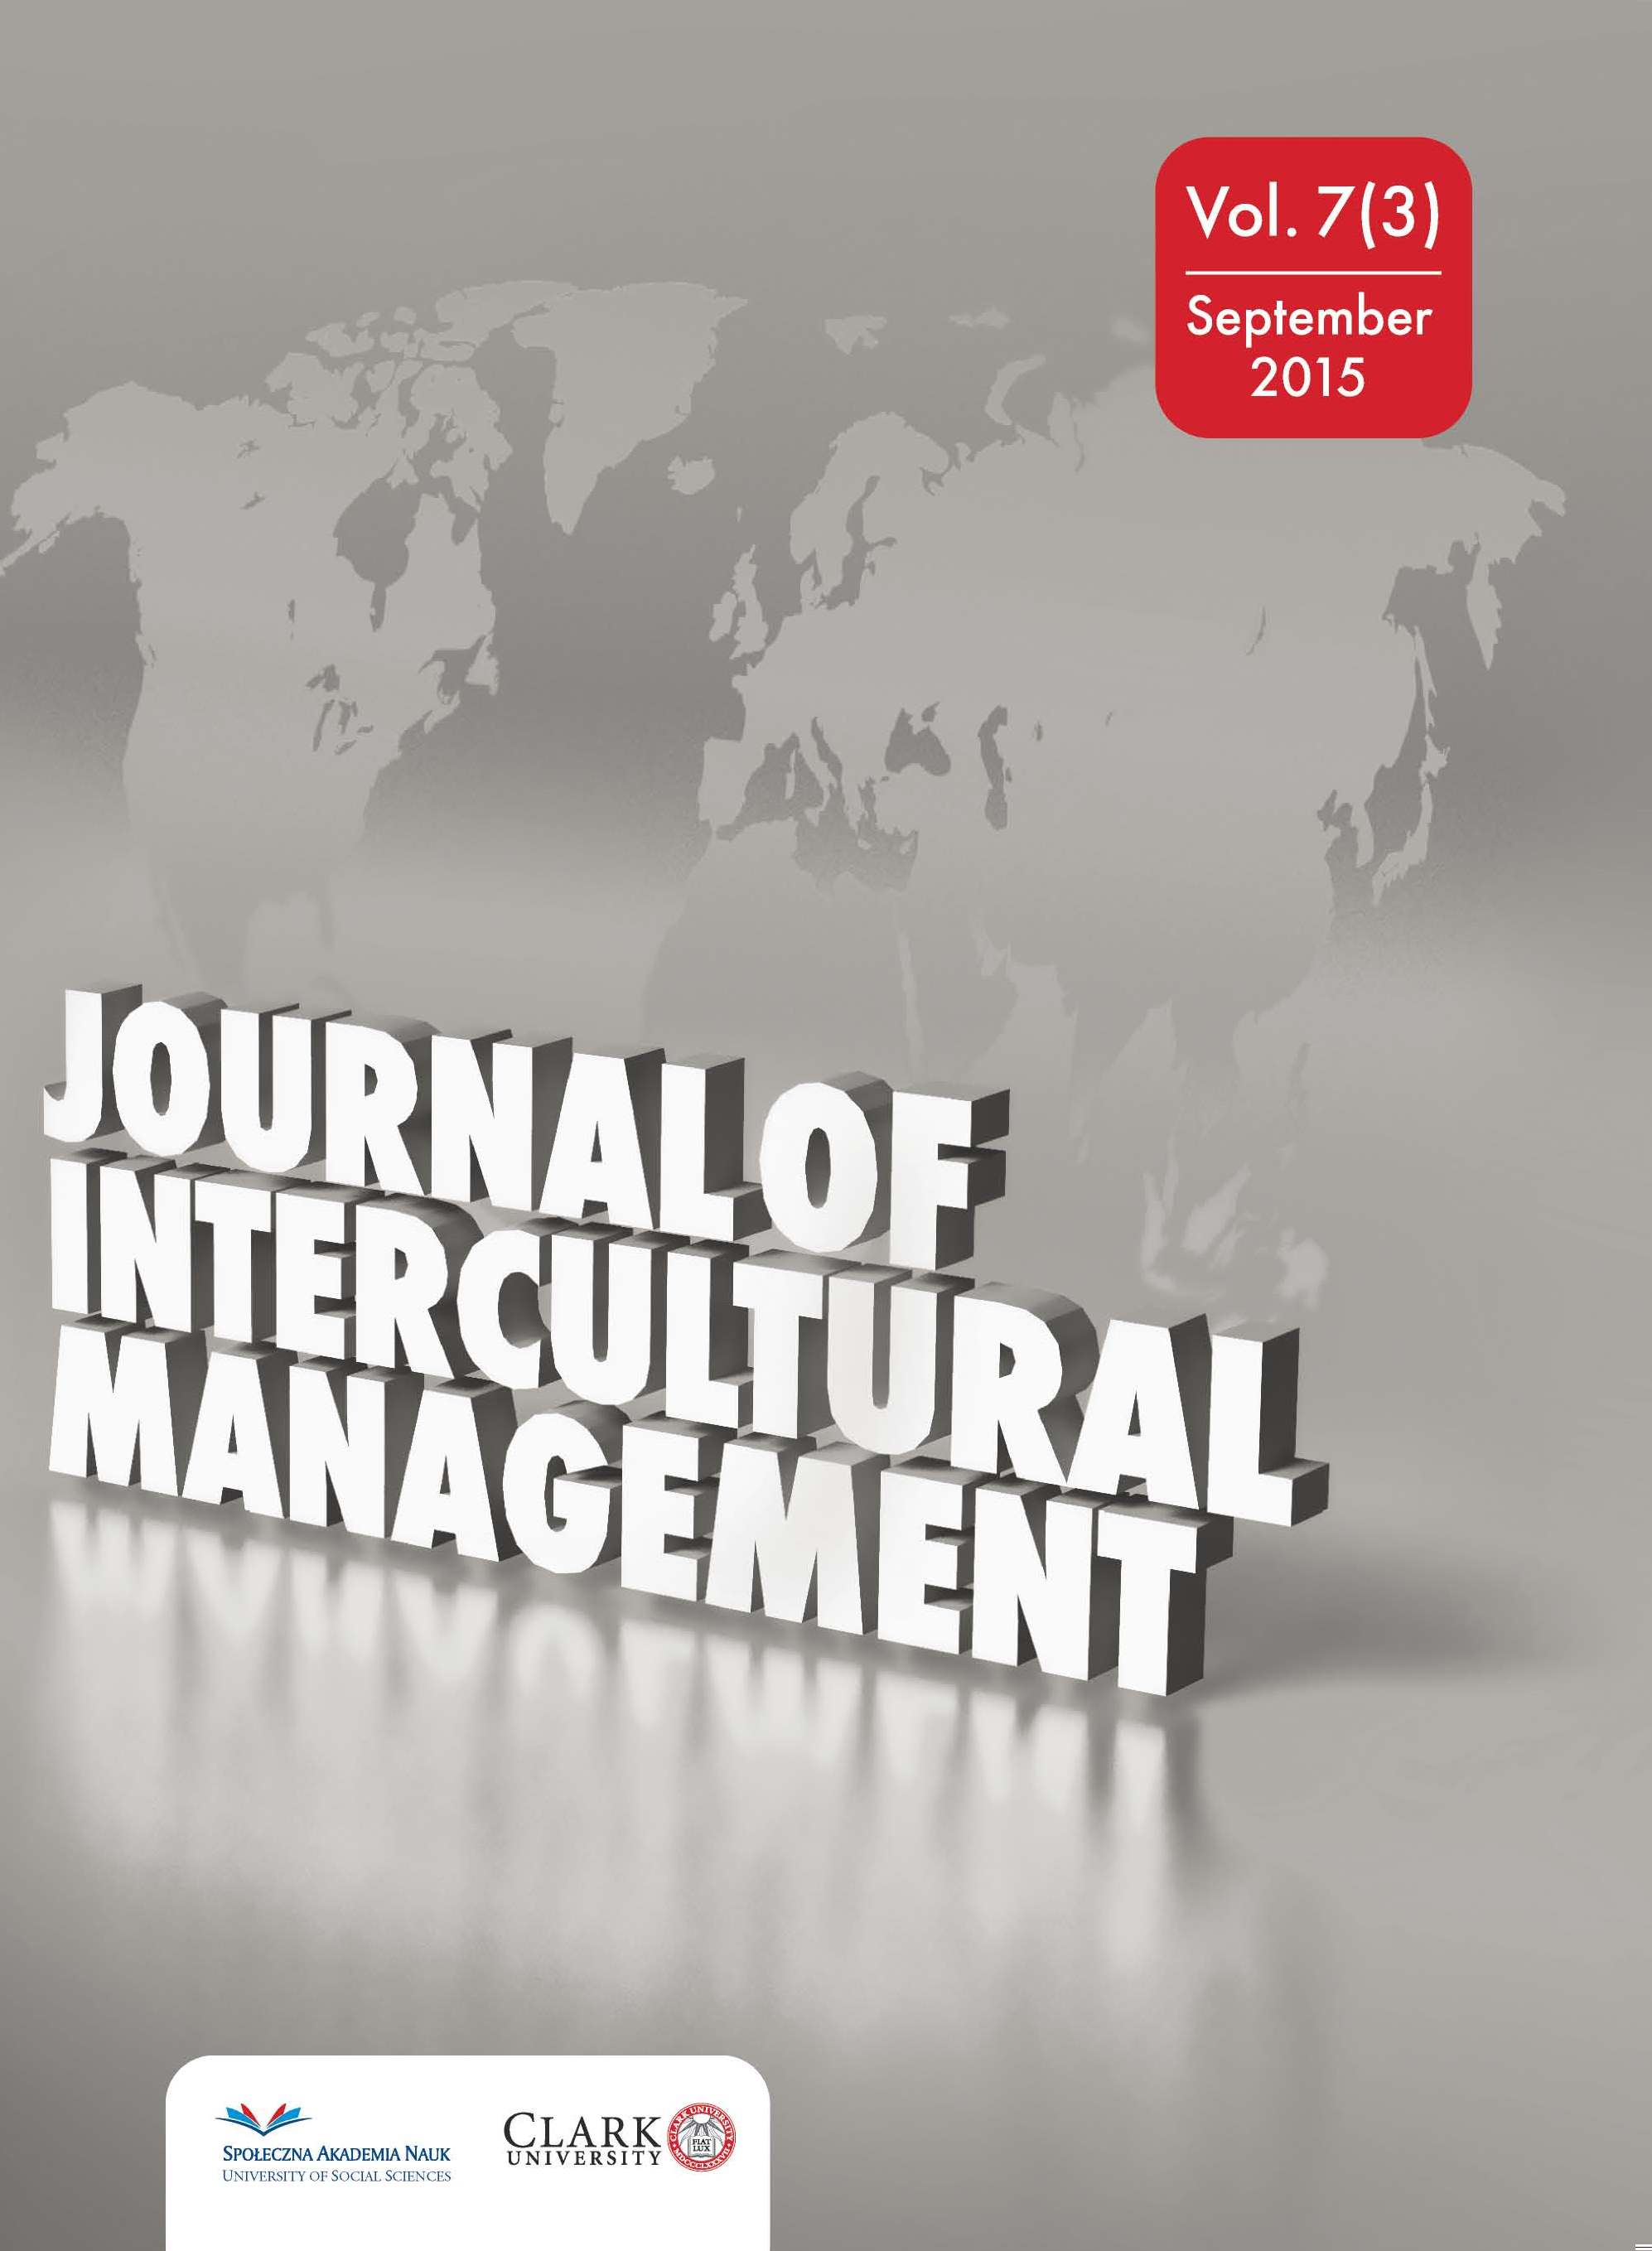 Organizational Culture as a Variable that Determines Effective Cross-cultural Management